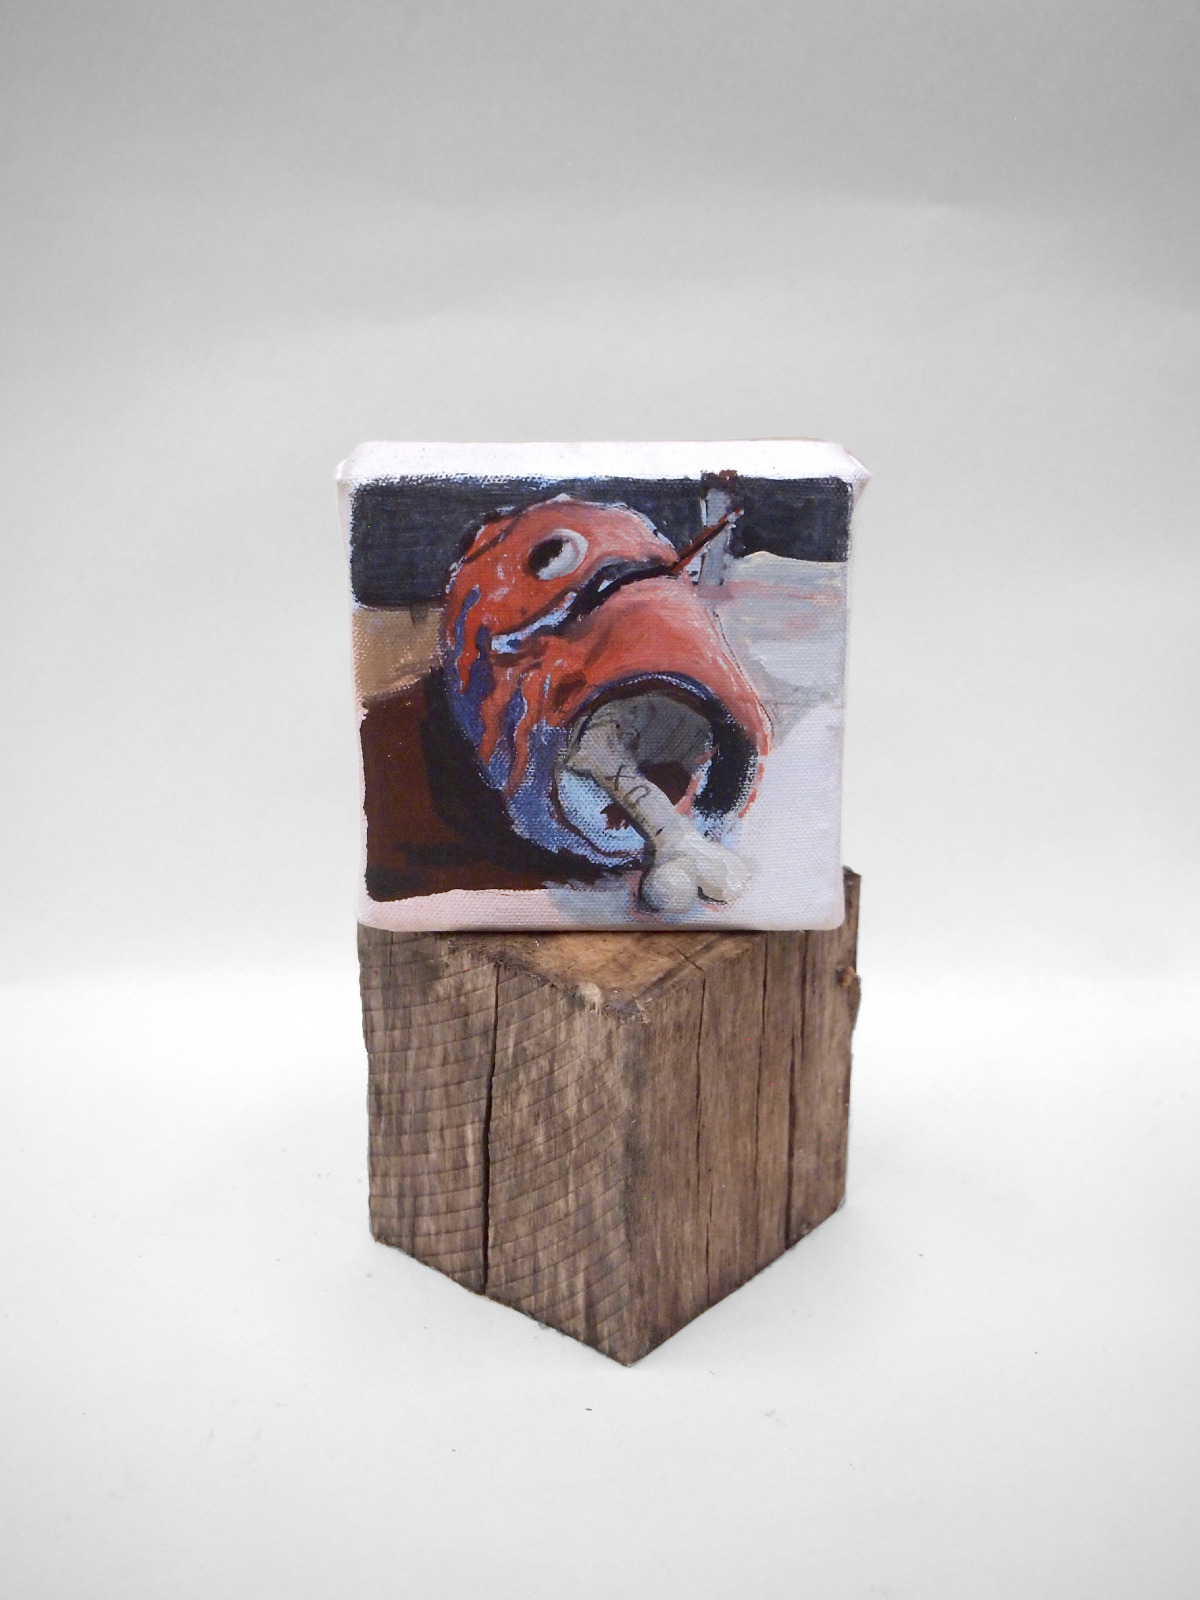 Photo of a painting showing a bone laying in a helmet atop a wooden cube